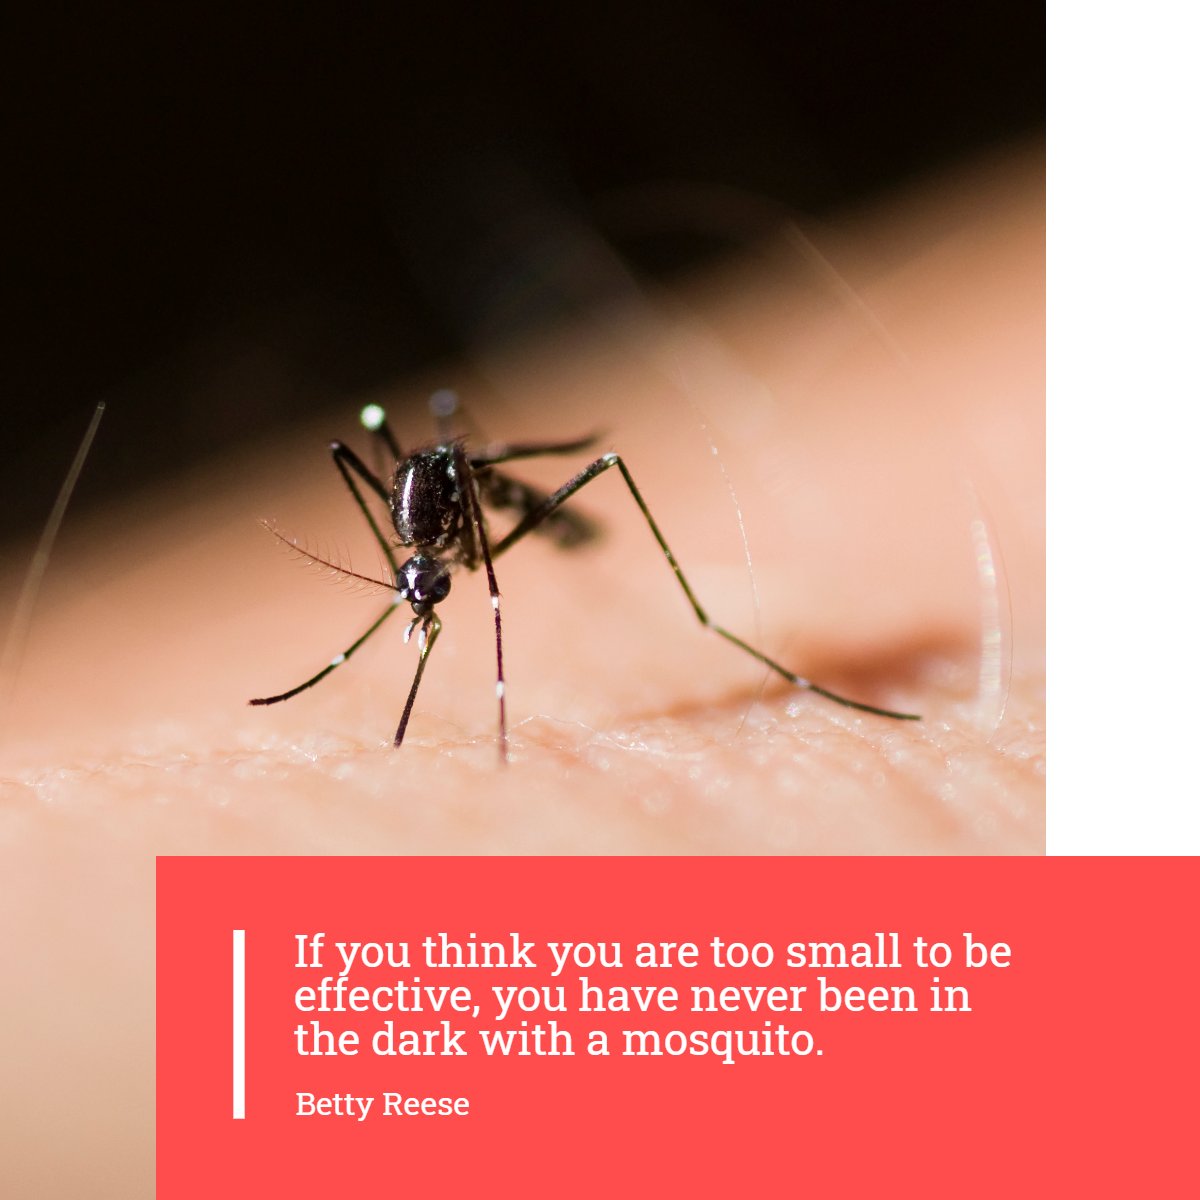 LOL! 😂

#fun    #meme    #mosquitos    #bettyreese
#LakeNorman #LakeNormanRealty #RealEstate #Denver #Mooresville #ForSale #Home #NewHome #DreamHome #HouseHunting #Property #RealEstateAgent #Sold #HomesForSale #UnderContract #Realtor #RealtorLife #Investment #Broker